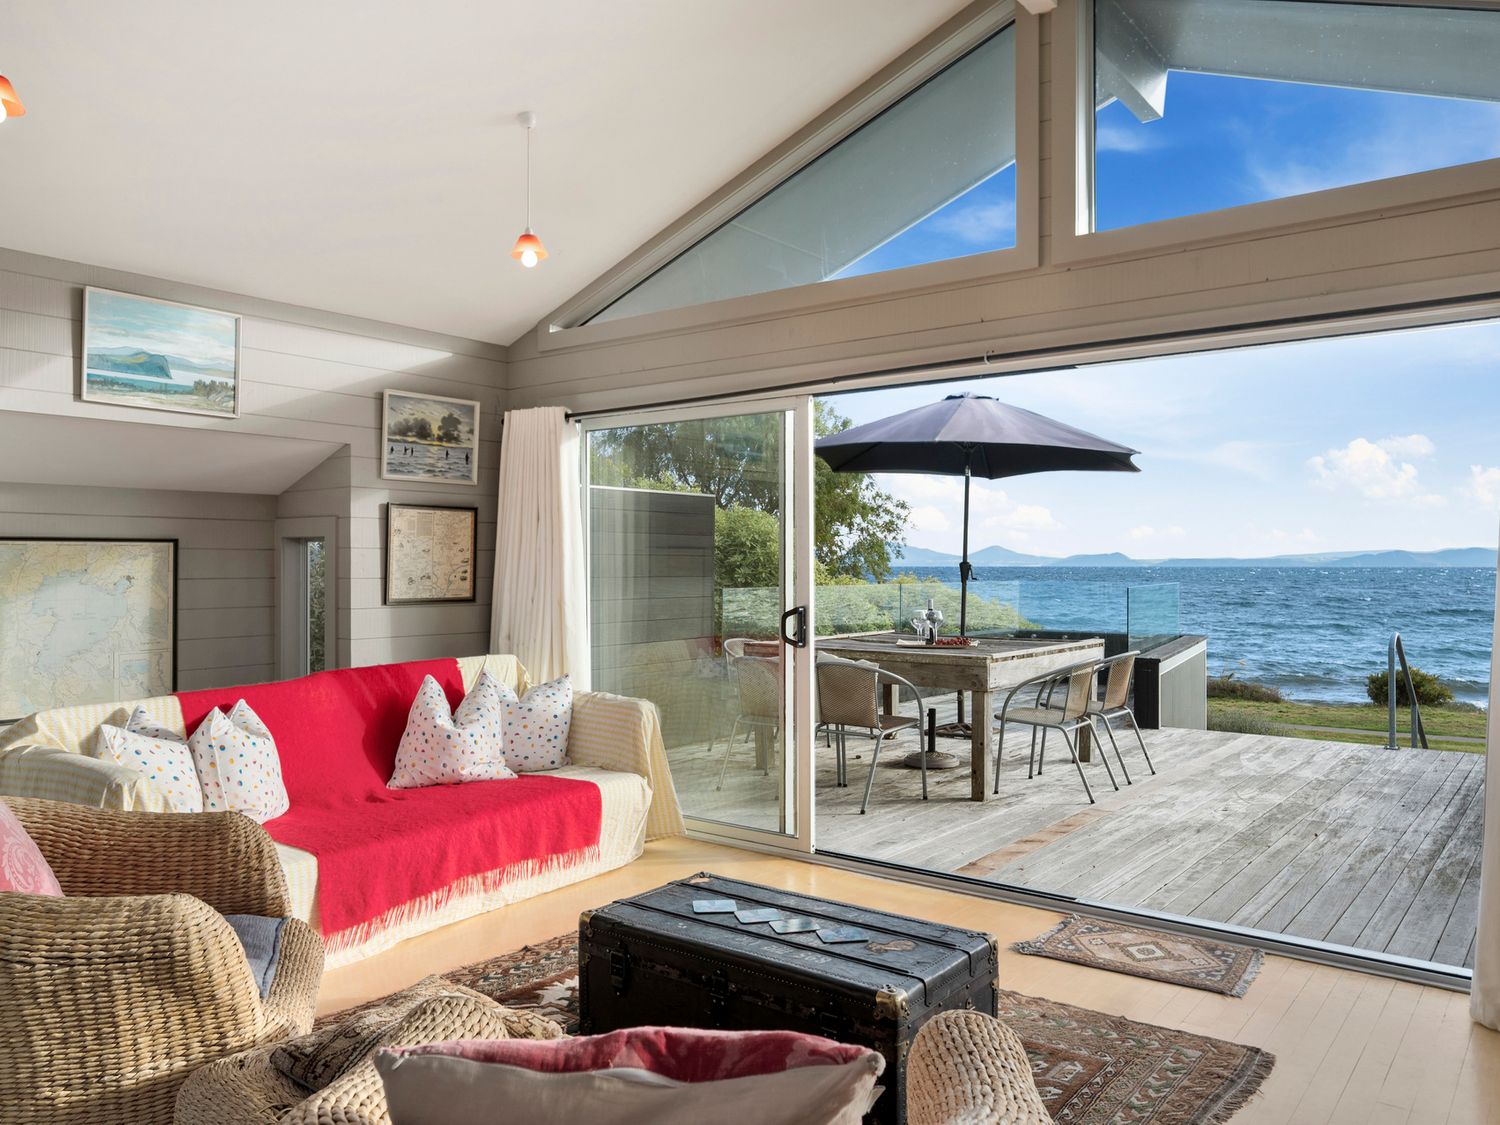 Five Mile Bliss - Lake Taupo Holiday Home -  - 1135355 - photo 1